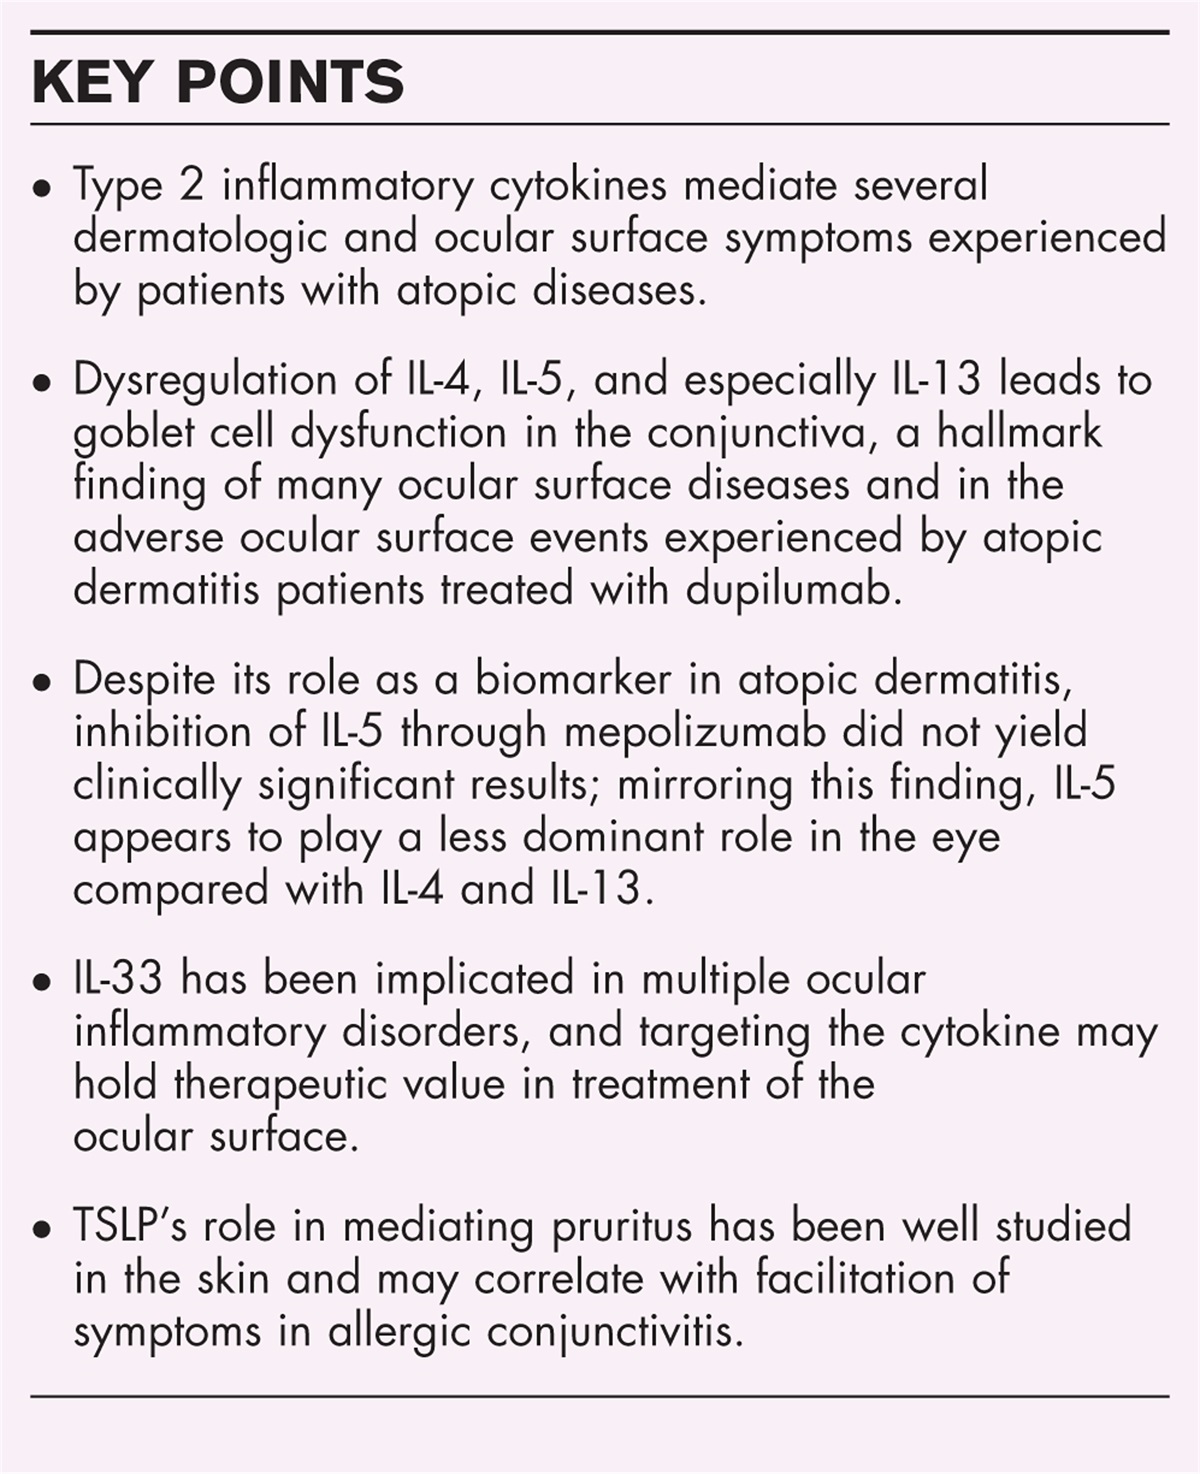 Comparison of cytokine mediators in type 2 inflammatory conditions on the skin and ocular surface